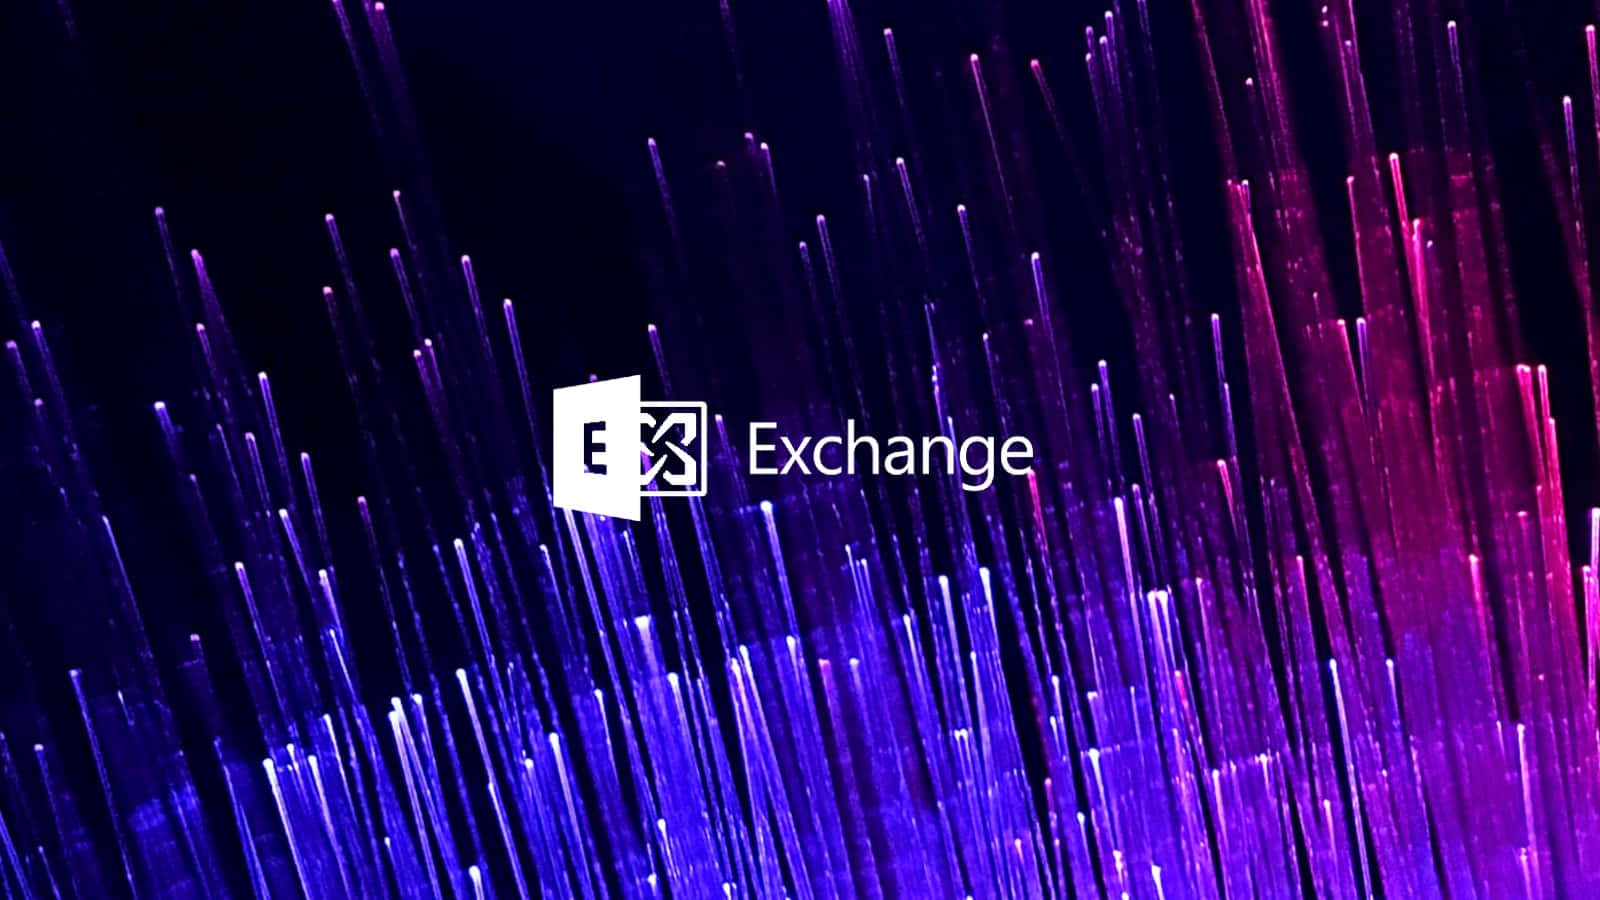 Take Control of Your Finances with Exchange Wallpaper